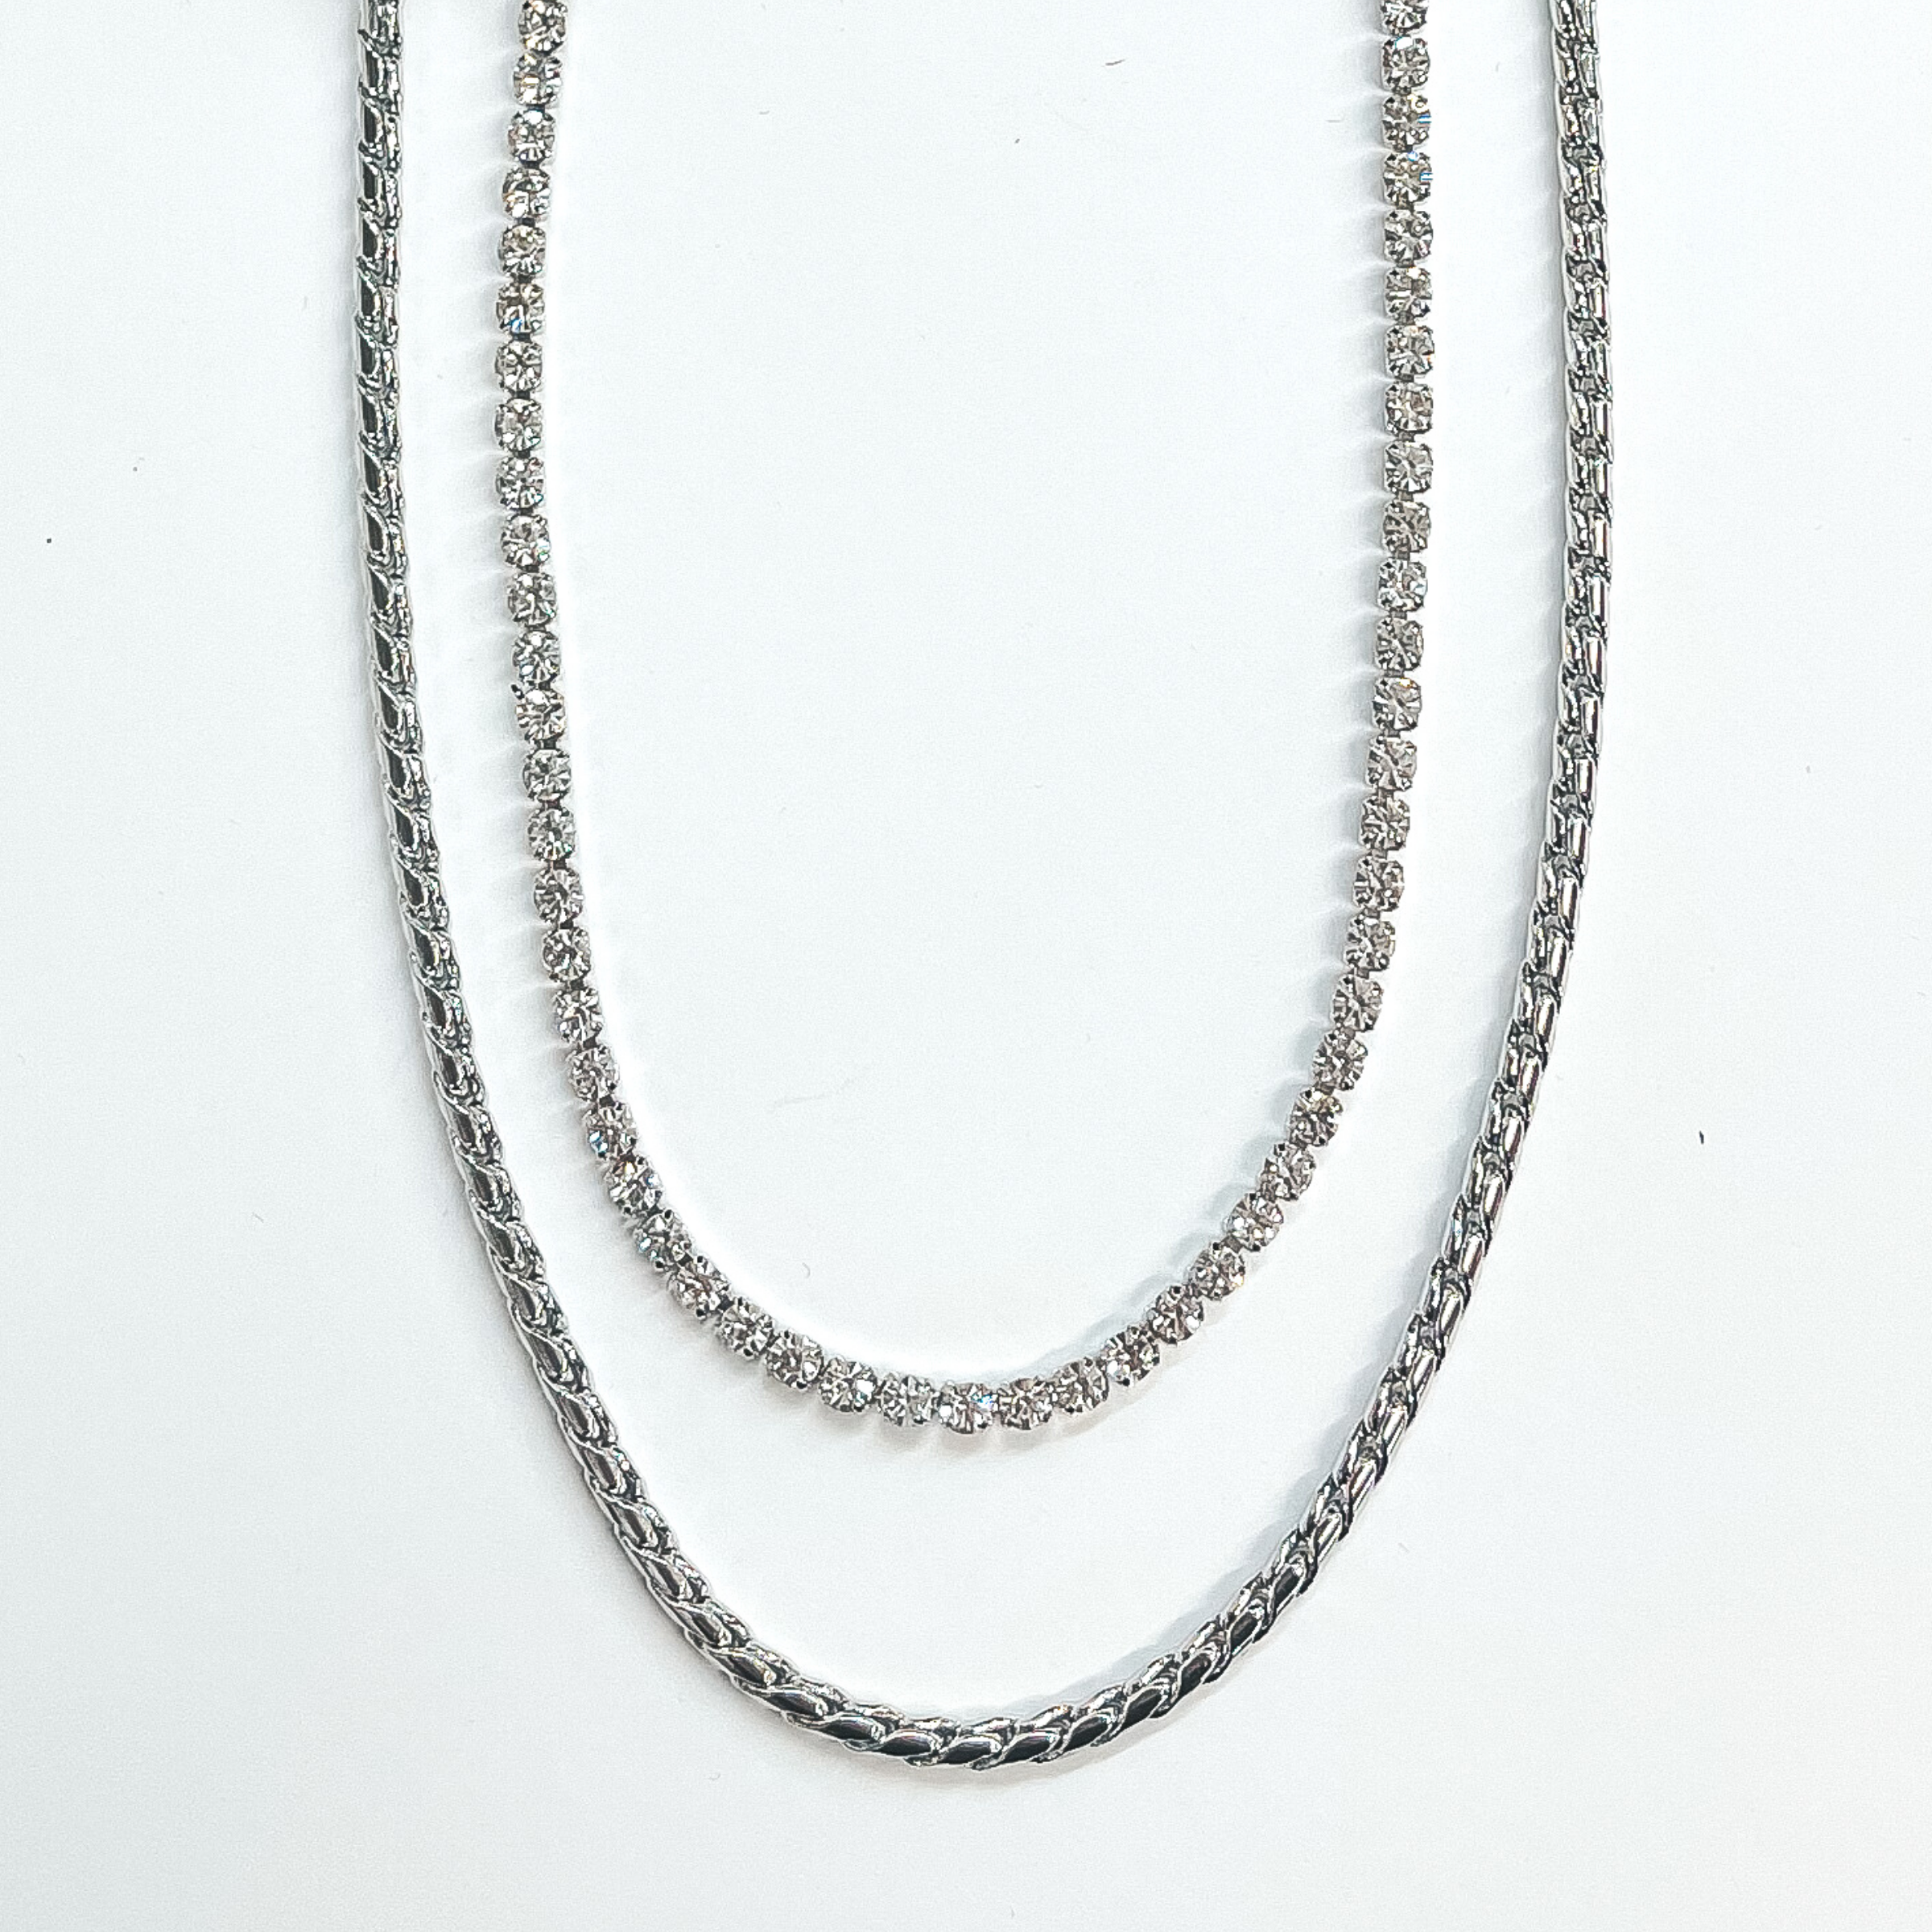 Double Layered Braid Chain Necklace with Rhinestones in Silver - Giddy Up Glamour Boutique